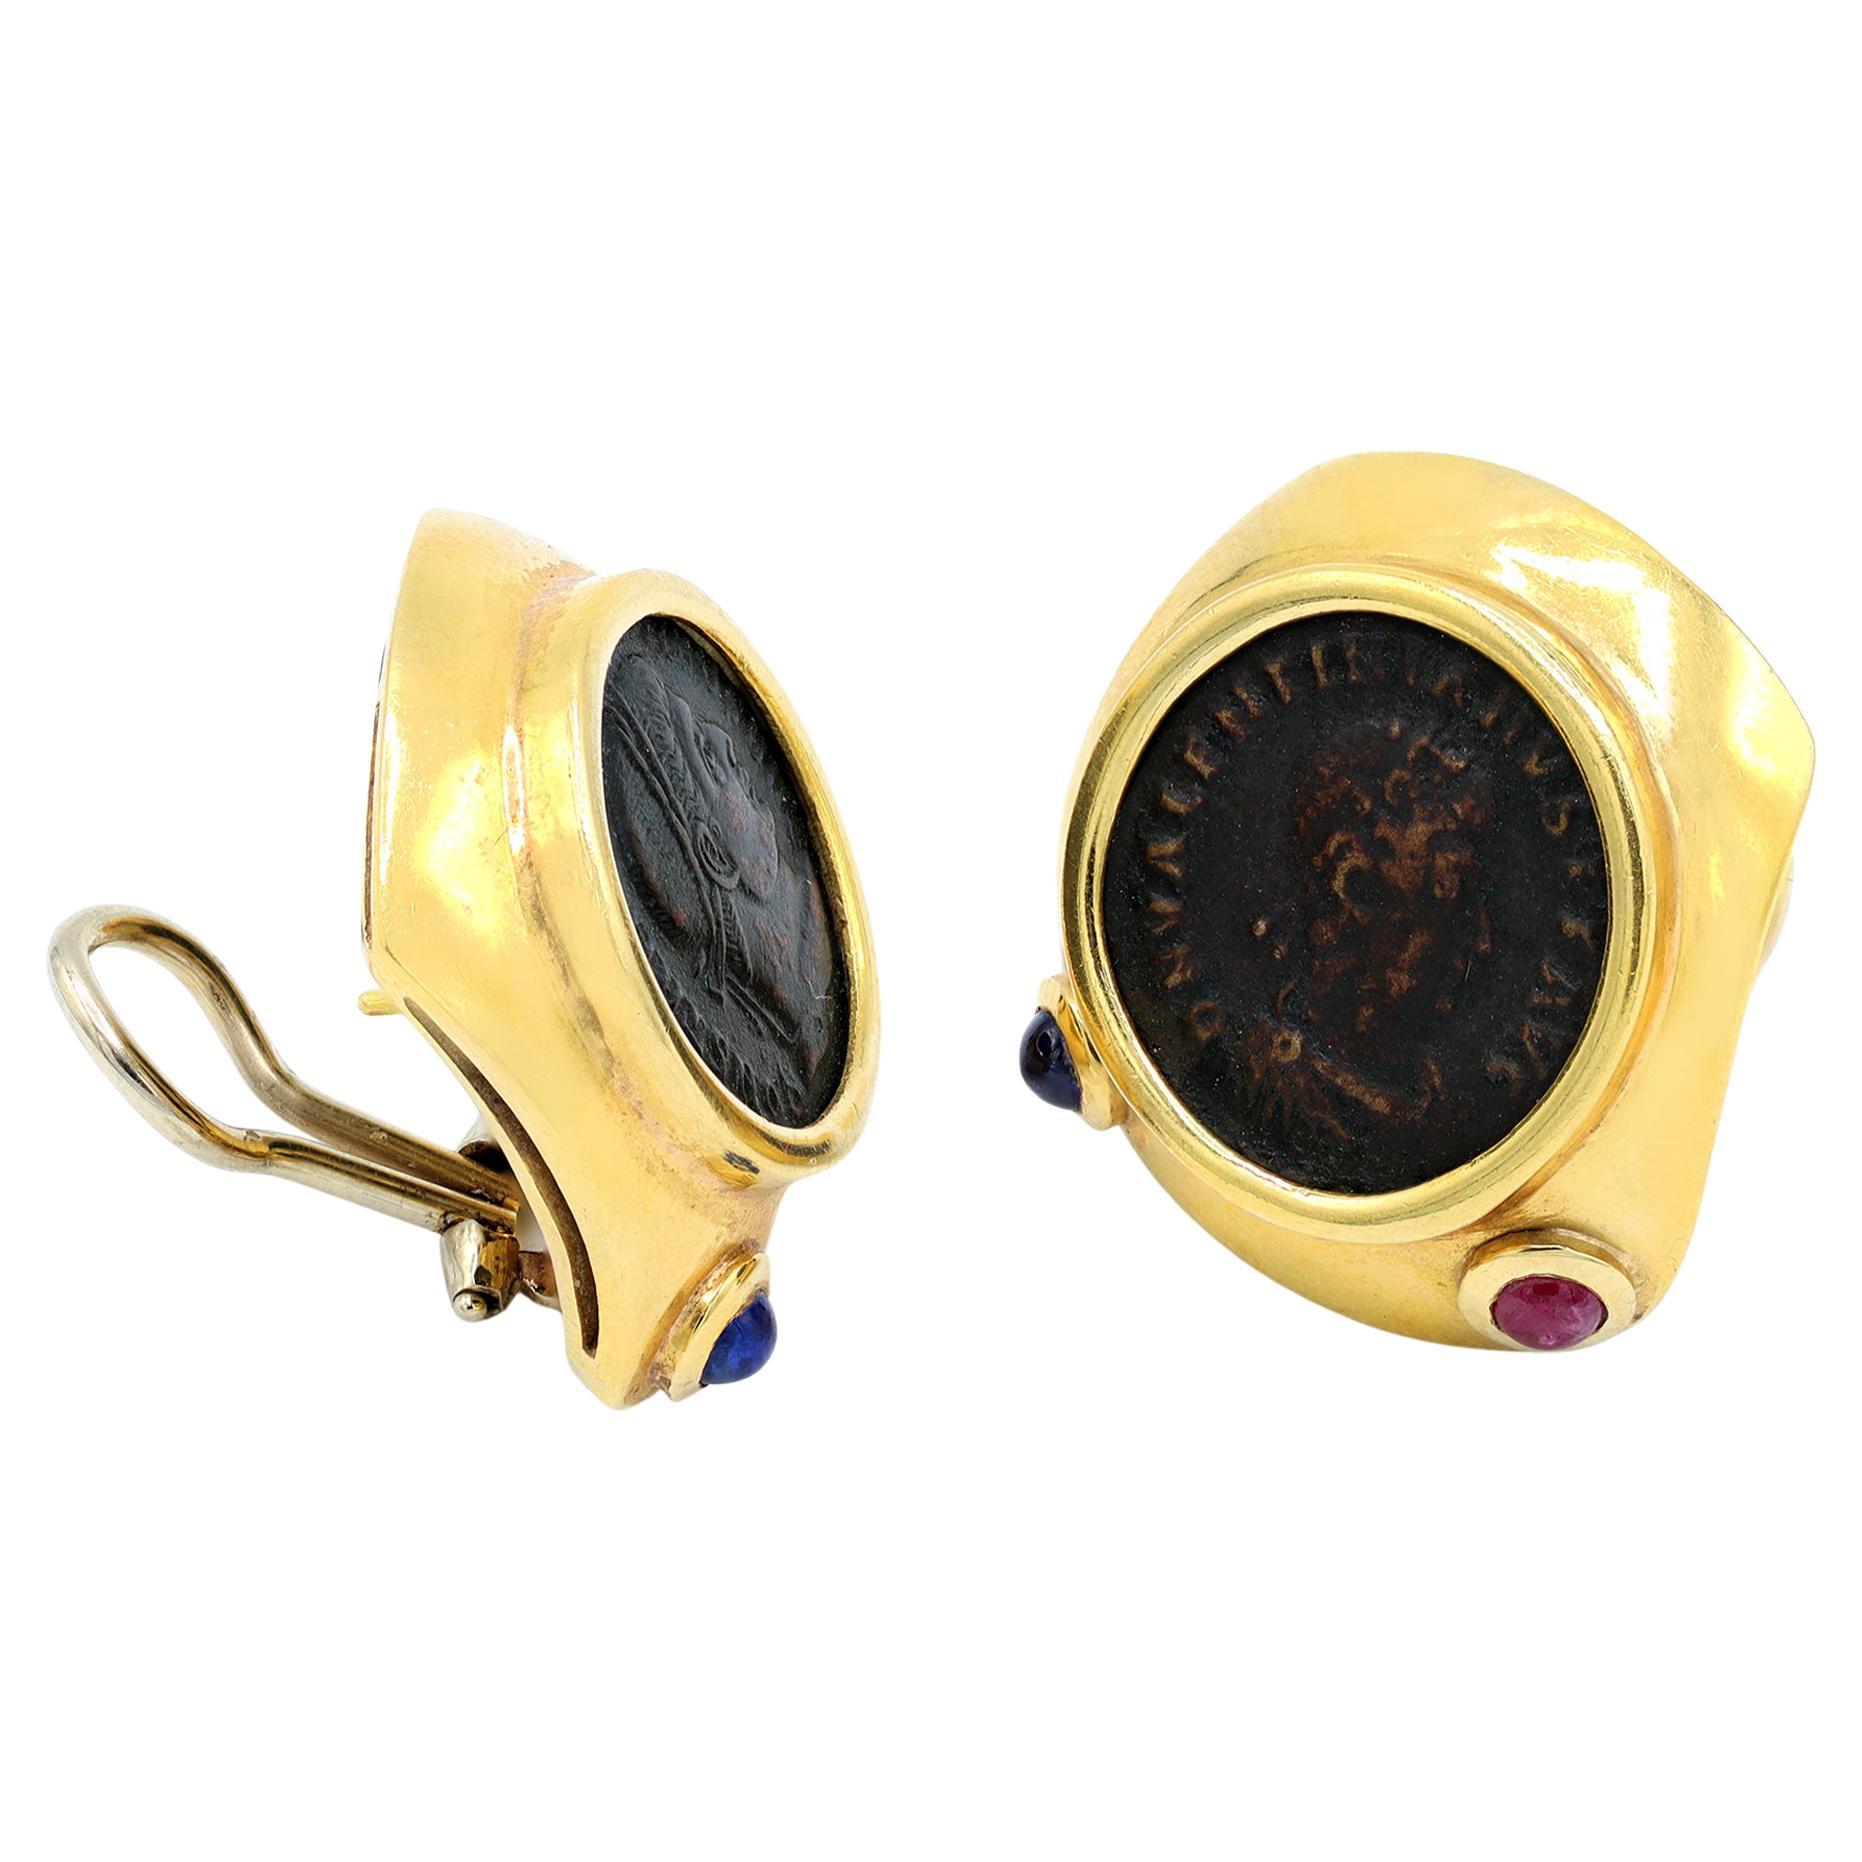 A pair of clip-on earrings circa 1960-70 featuring ancient Roman coins. The setting is made in 18-karat yellow gold adorned with small cabochon sapphire and ruby on the lower side of the coin bezel. The four cabochons have an estimated weight of